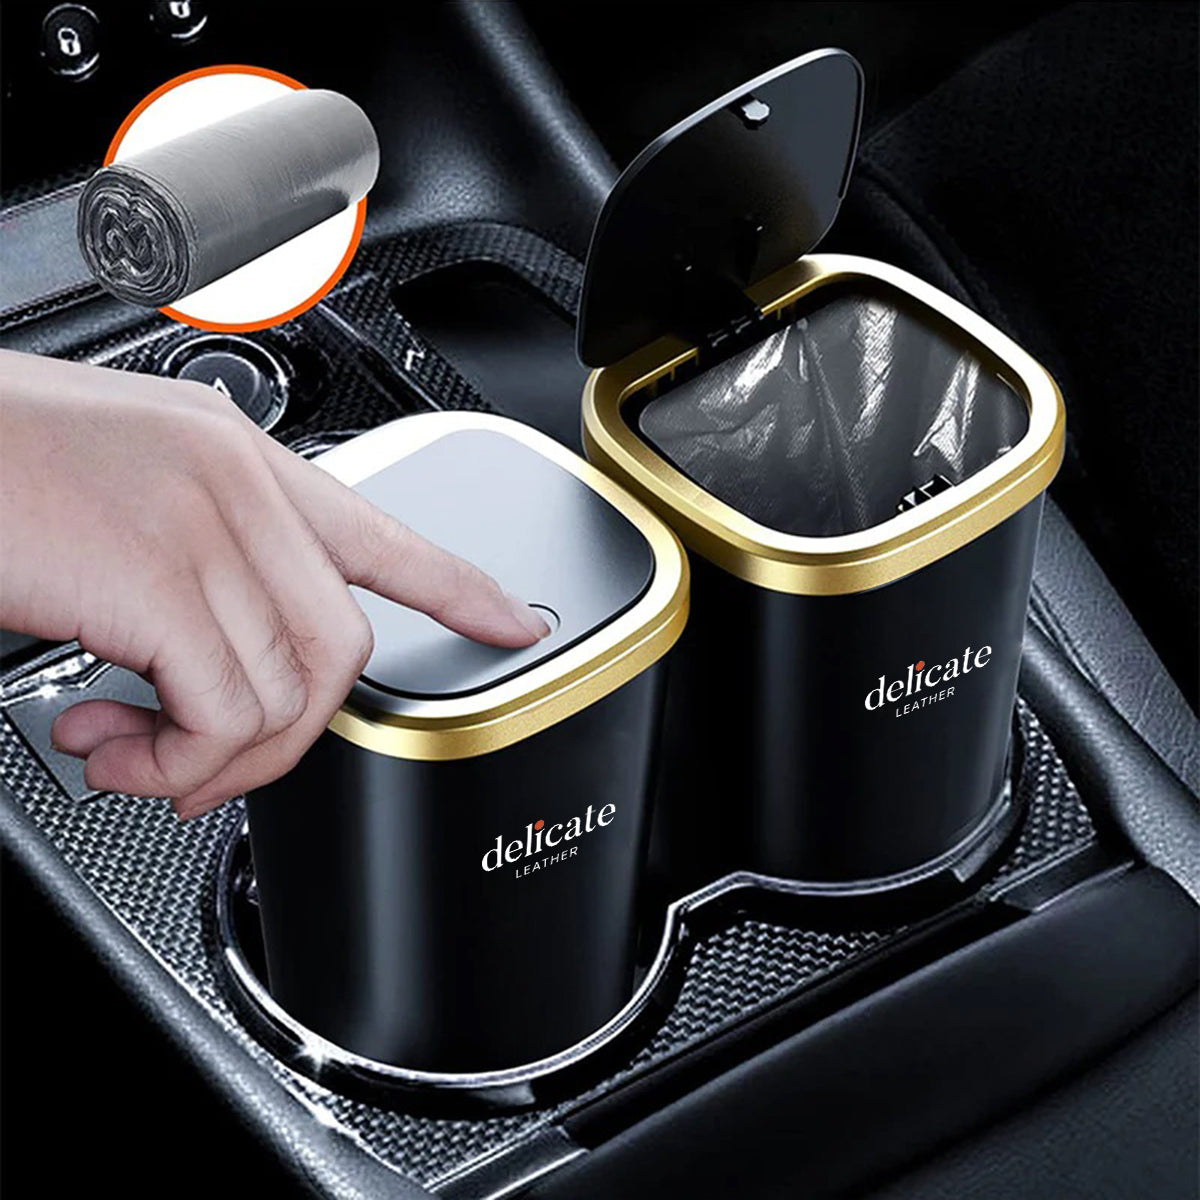 Car Trash Cans, Custom For Your Cars, Compact & Durable Car Accessories for Interior Use 2 Pack, Practical Car Organizers and Storage Cups with Pop-Up Open, Car Accessories UE11993 - Delicate Leather